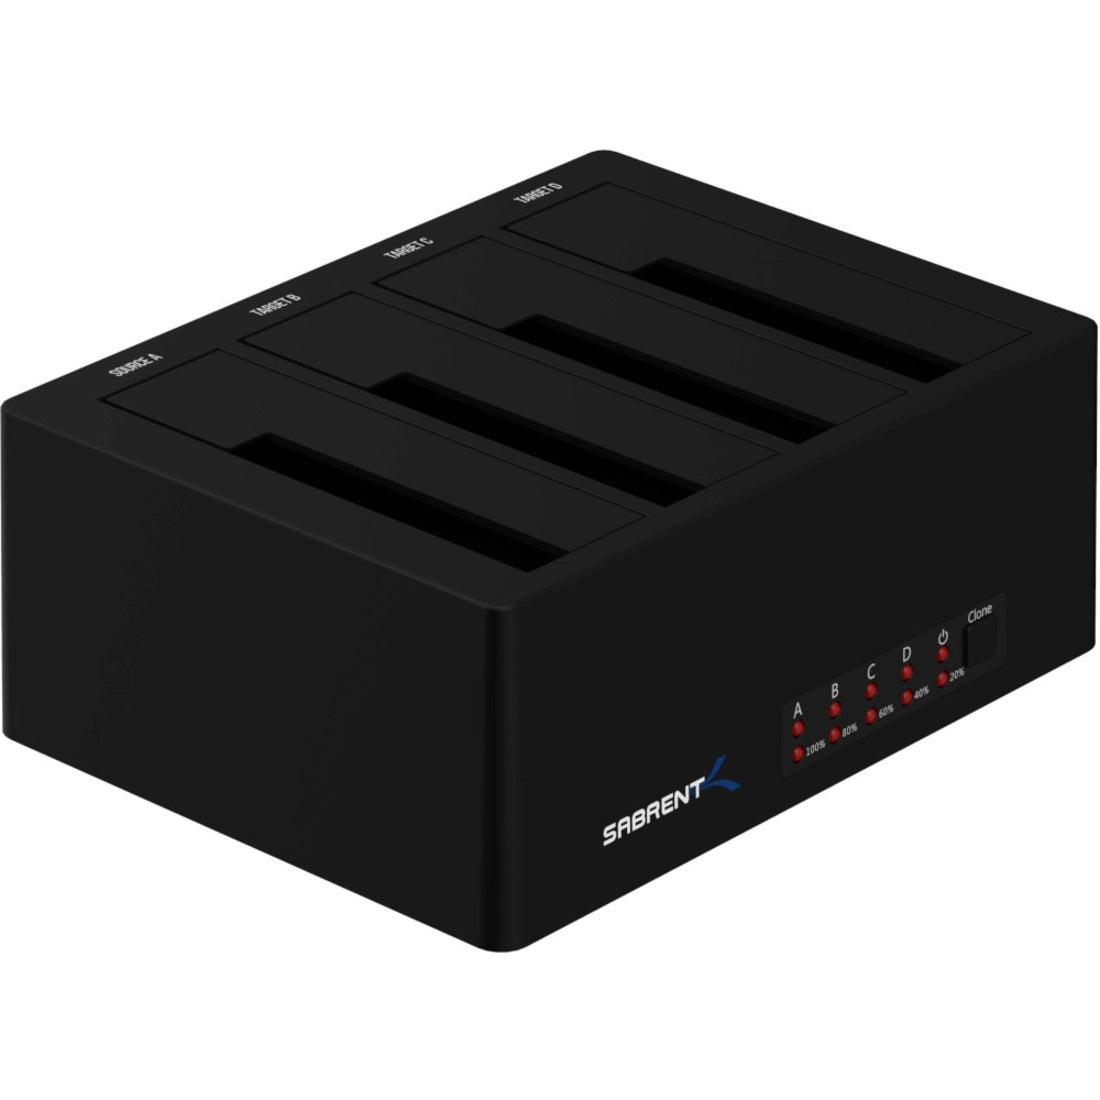 Sabrent DS-U3B4 4-Bay USB 3.0 SATA Docking Station, Hot Swappable, for PC and Mac, Black